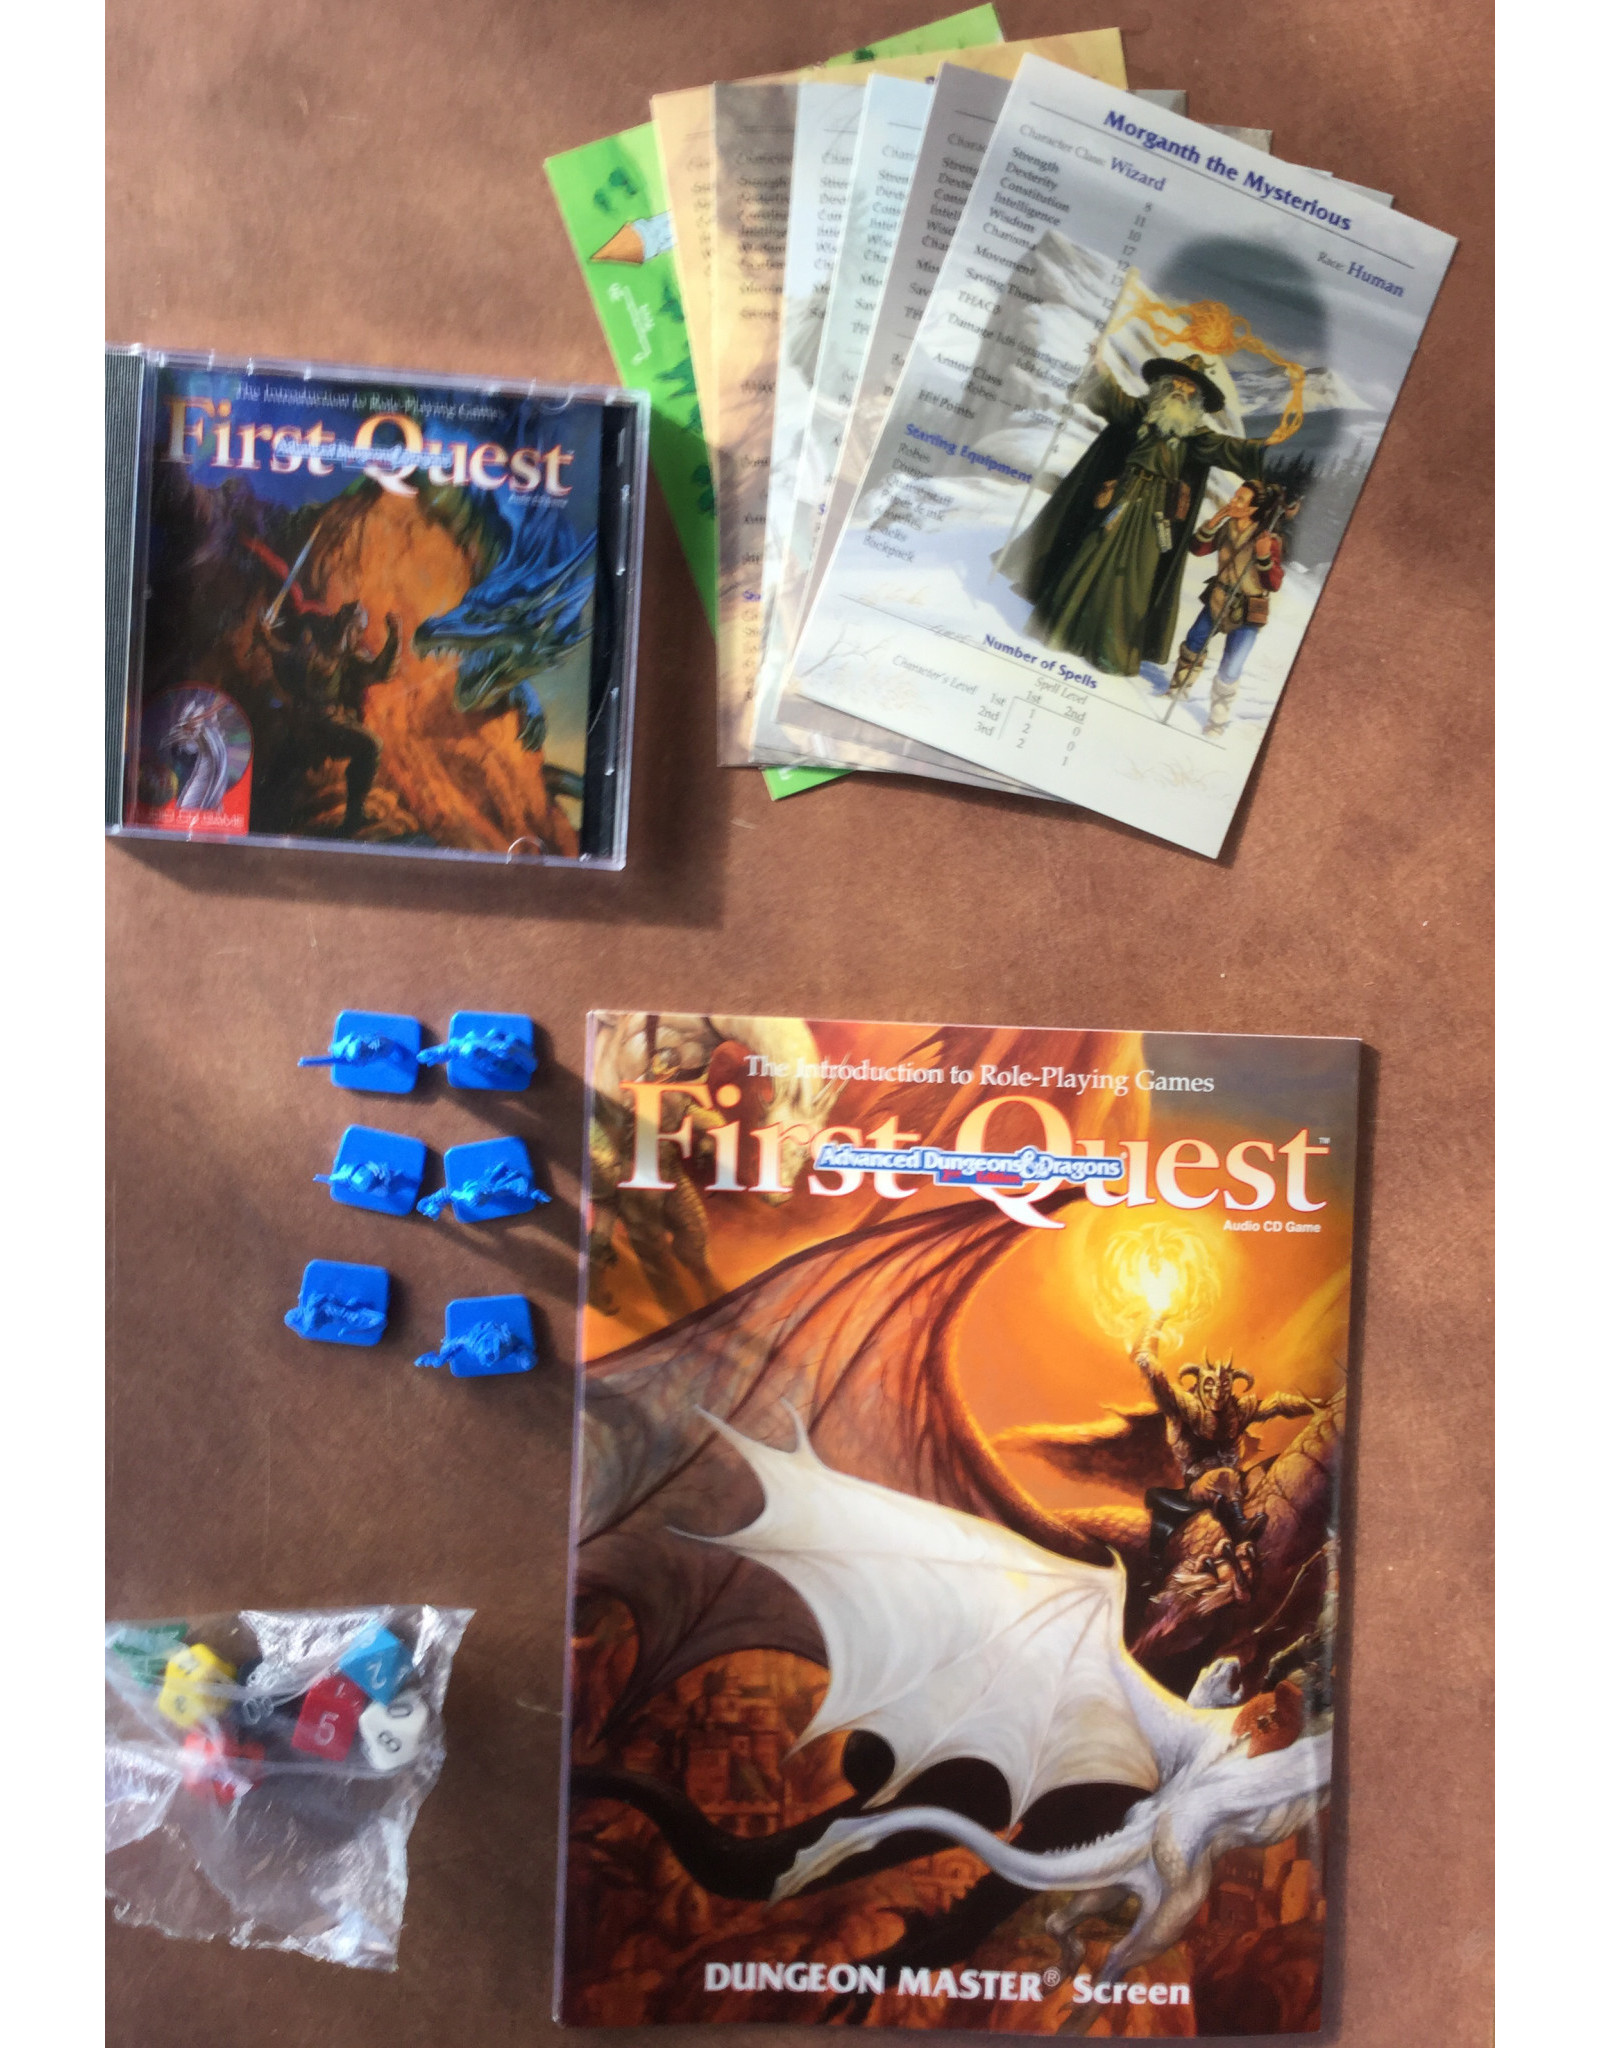 TSR First Quest 2nd Edition (1994)